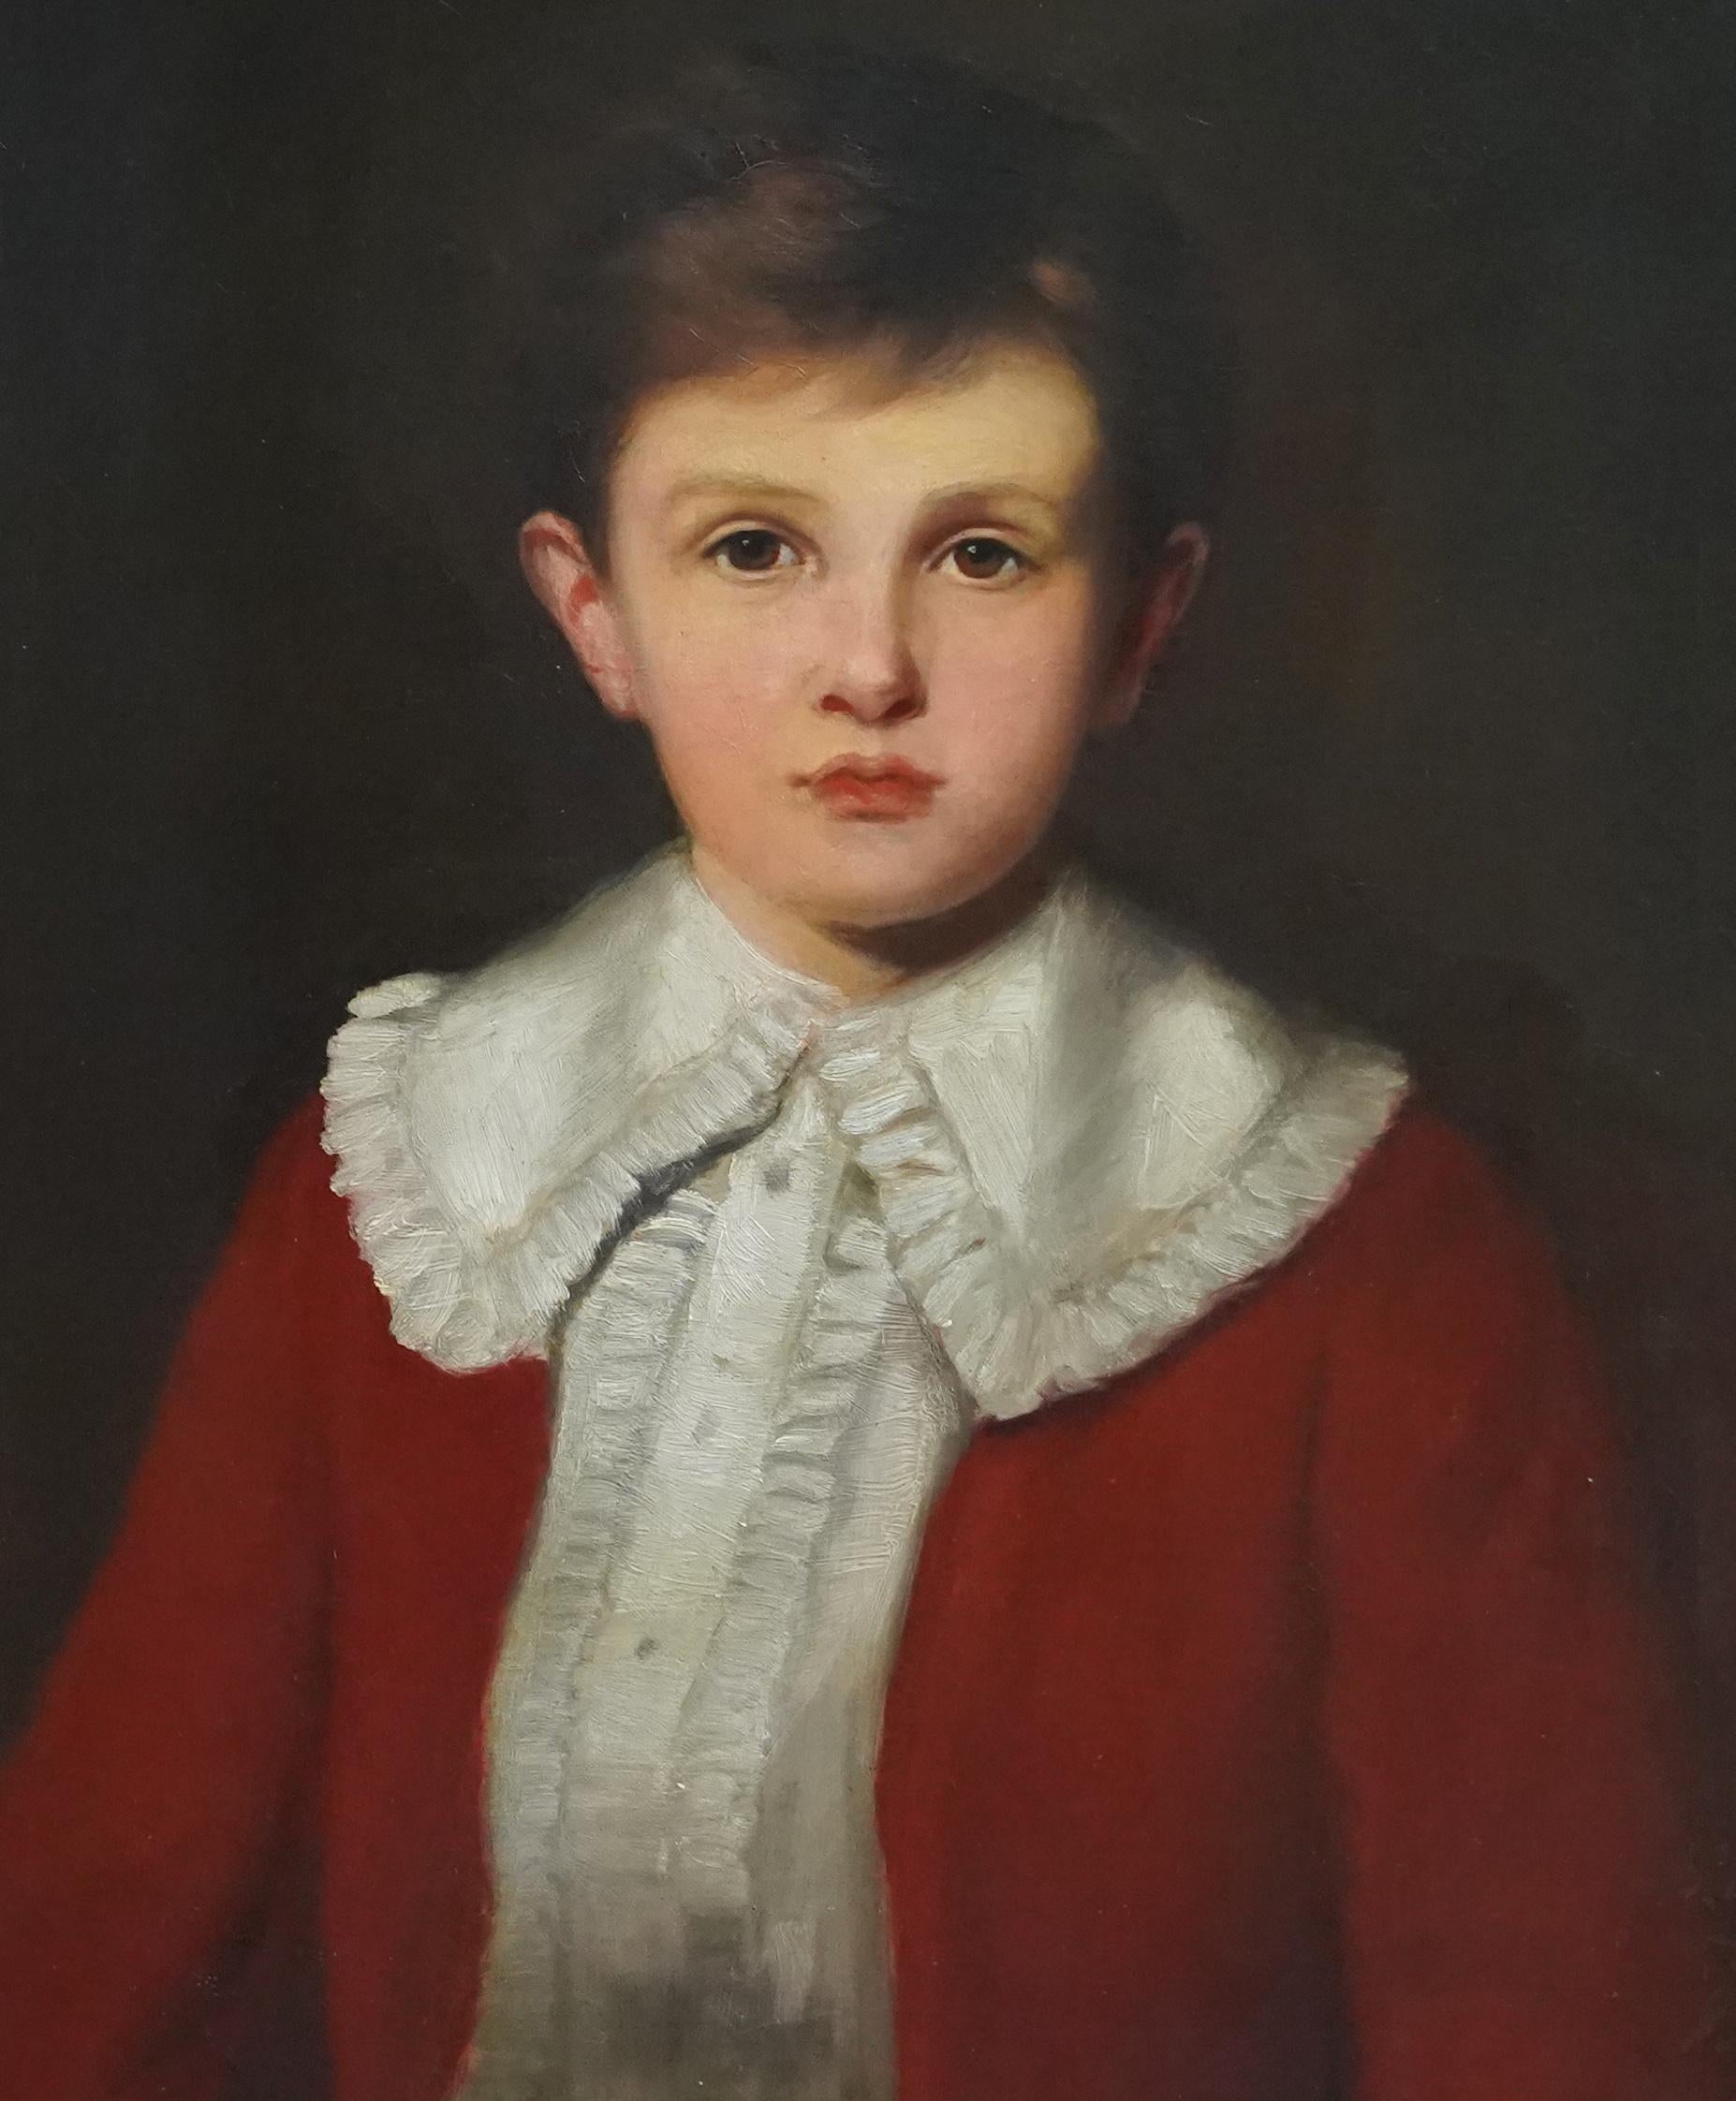 This charming British Victorian portrait oil painting is by noted portrait artist Gilbert Baldry. A half length portrait painted in 1892, the sitter is a young boy in a red coat with a large white collared shirt beneath. There is superb brush work